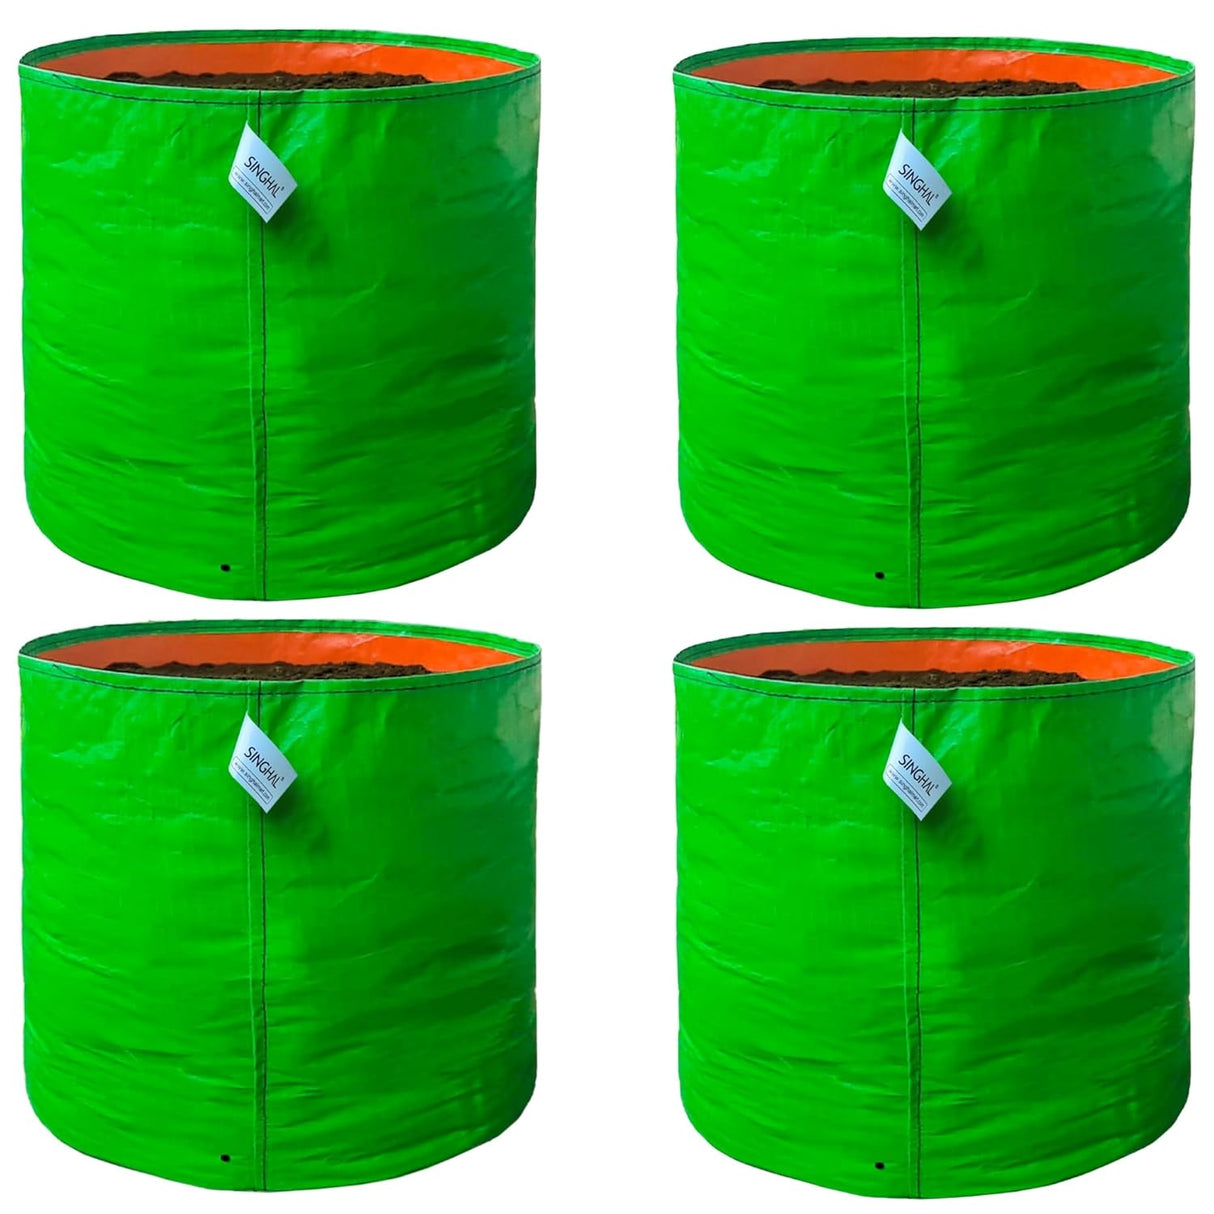 SINGHAL 24x24 inch Big Grow Bags Pack of 4 for Home Gardening, HDPE Plants Bag for Fruits, Vegetables Flowers, 260 GSM Grow Bag, UV Protected